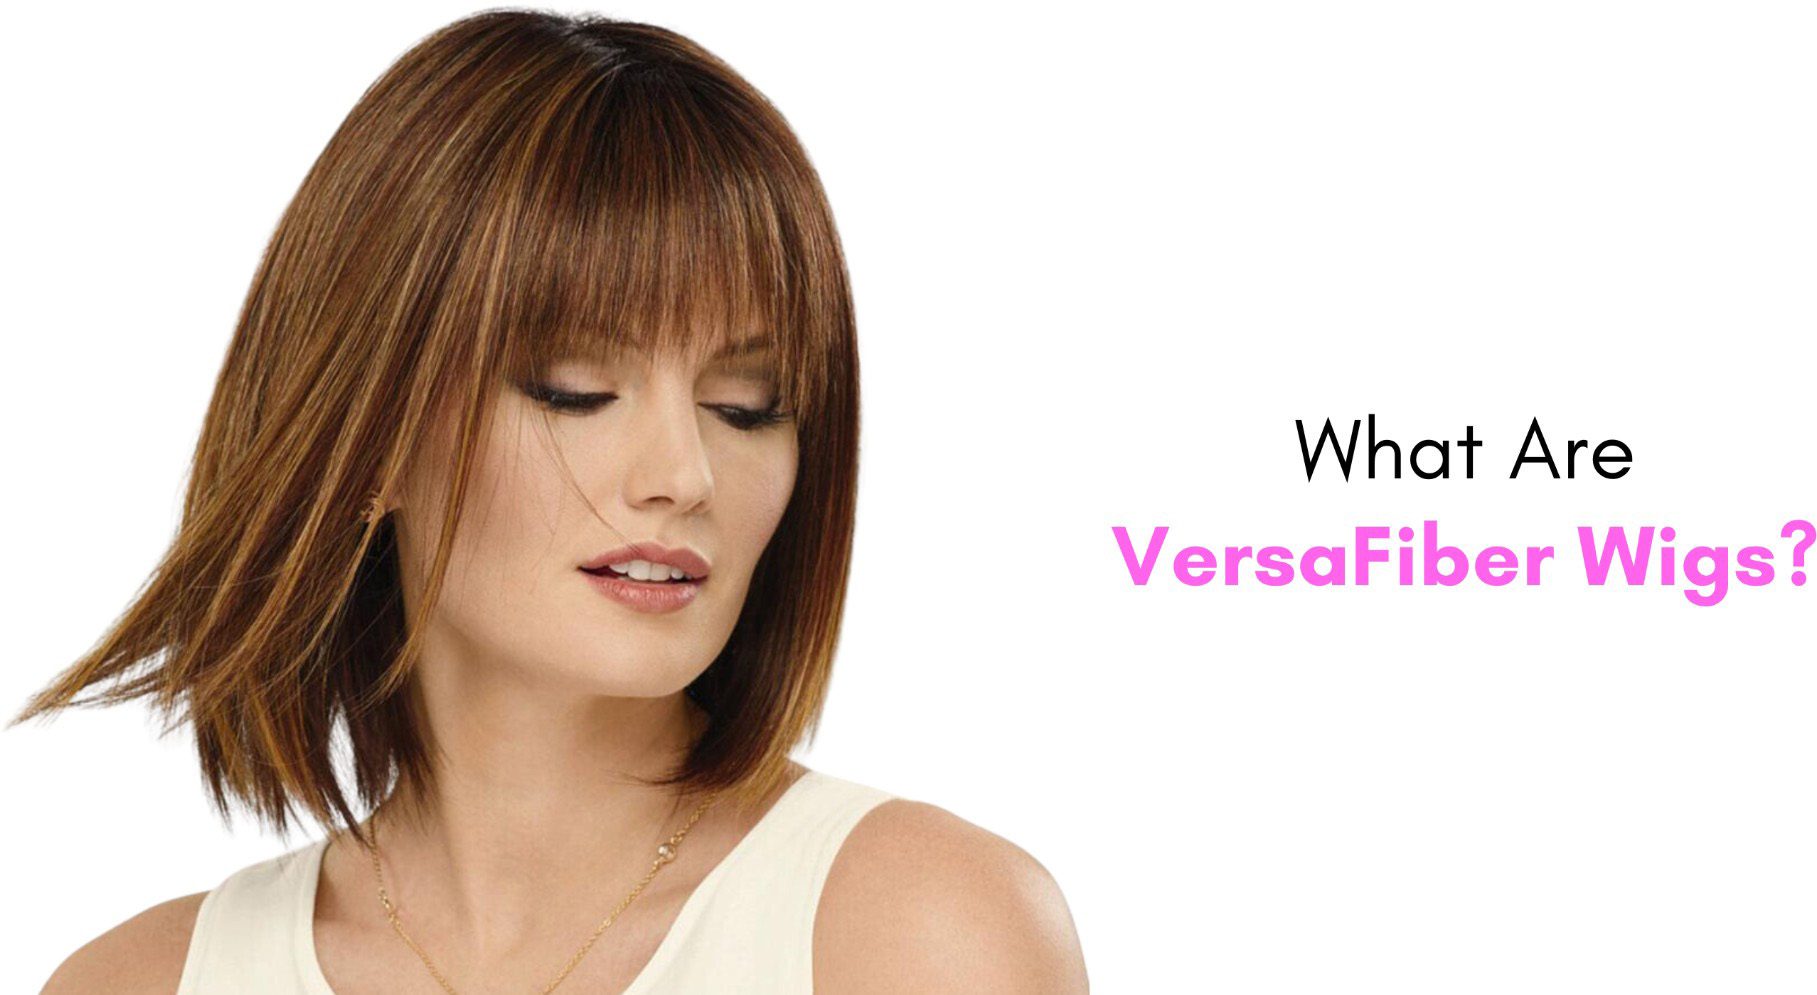 What Are VersaFiber Wigs?